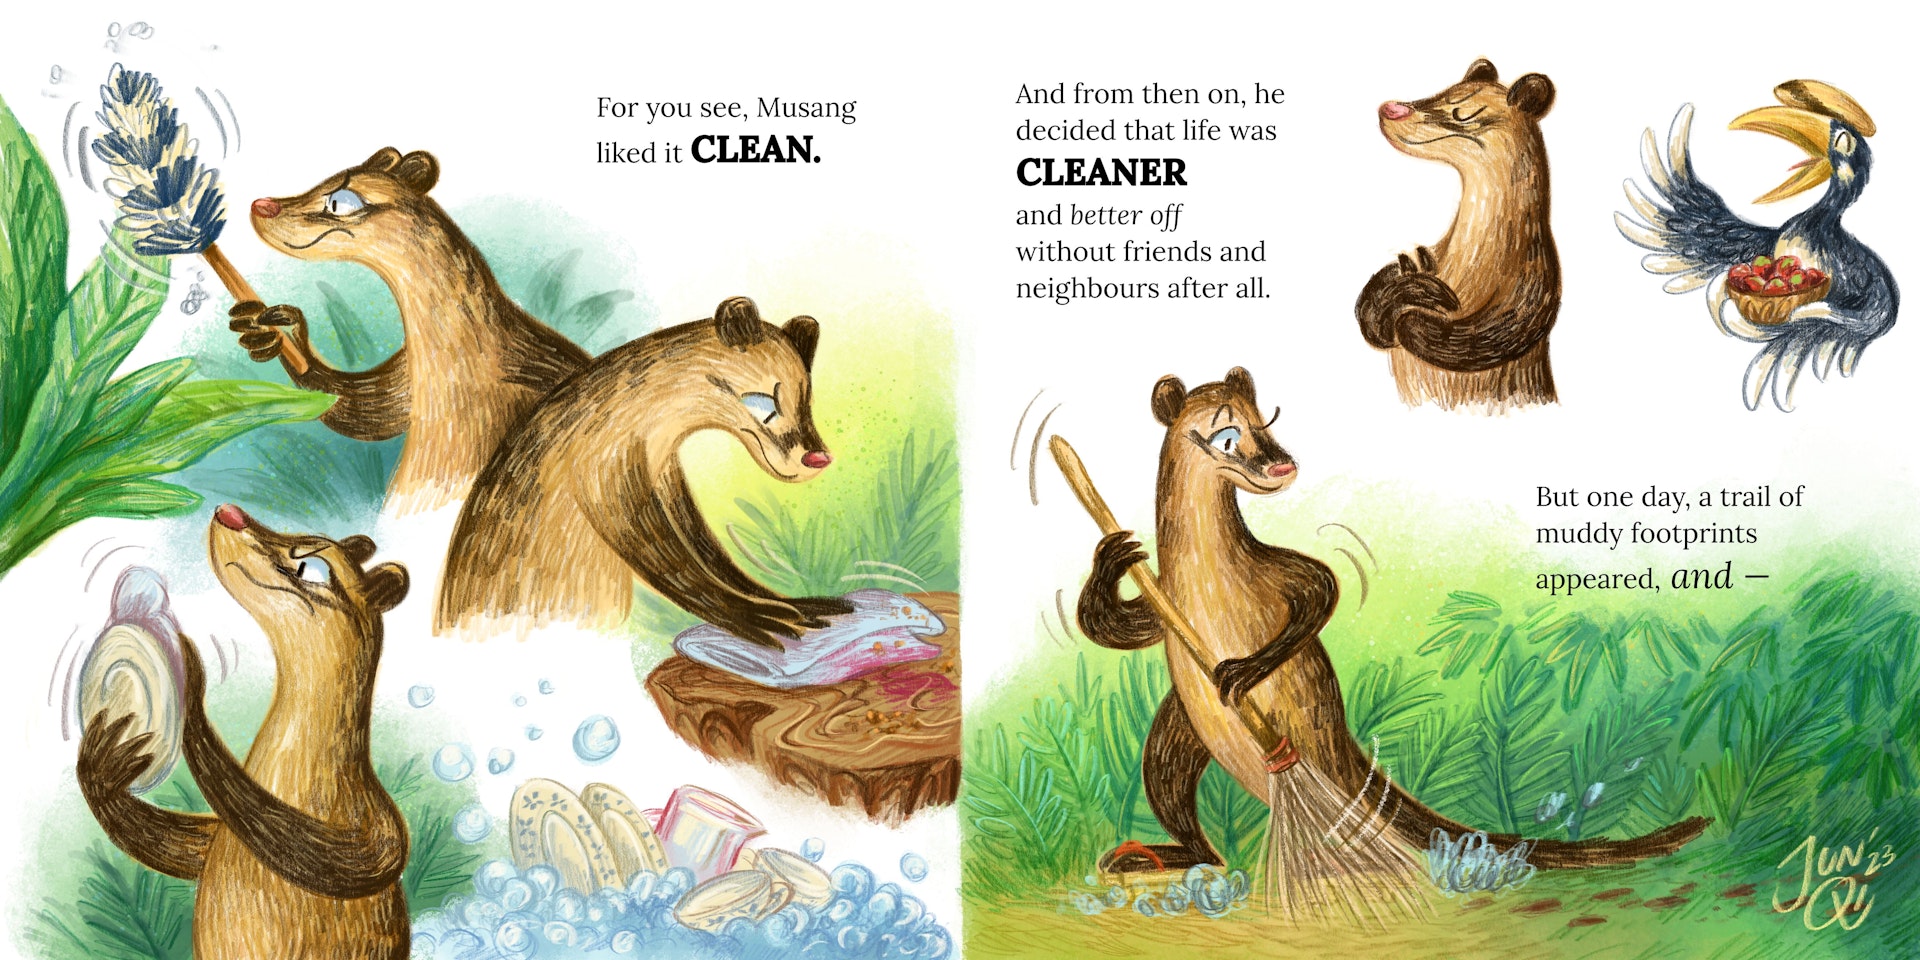 Two page spot illustrations showing a musang cleaning his place and noticing a trail of muddy footprints while sweeping.